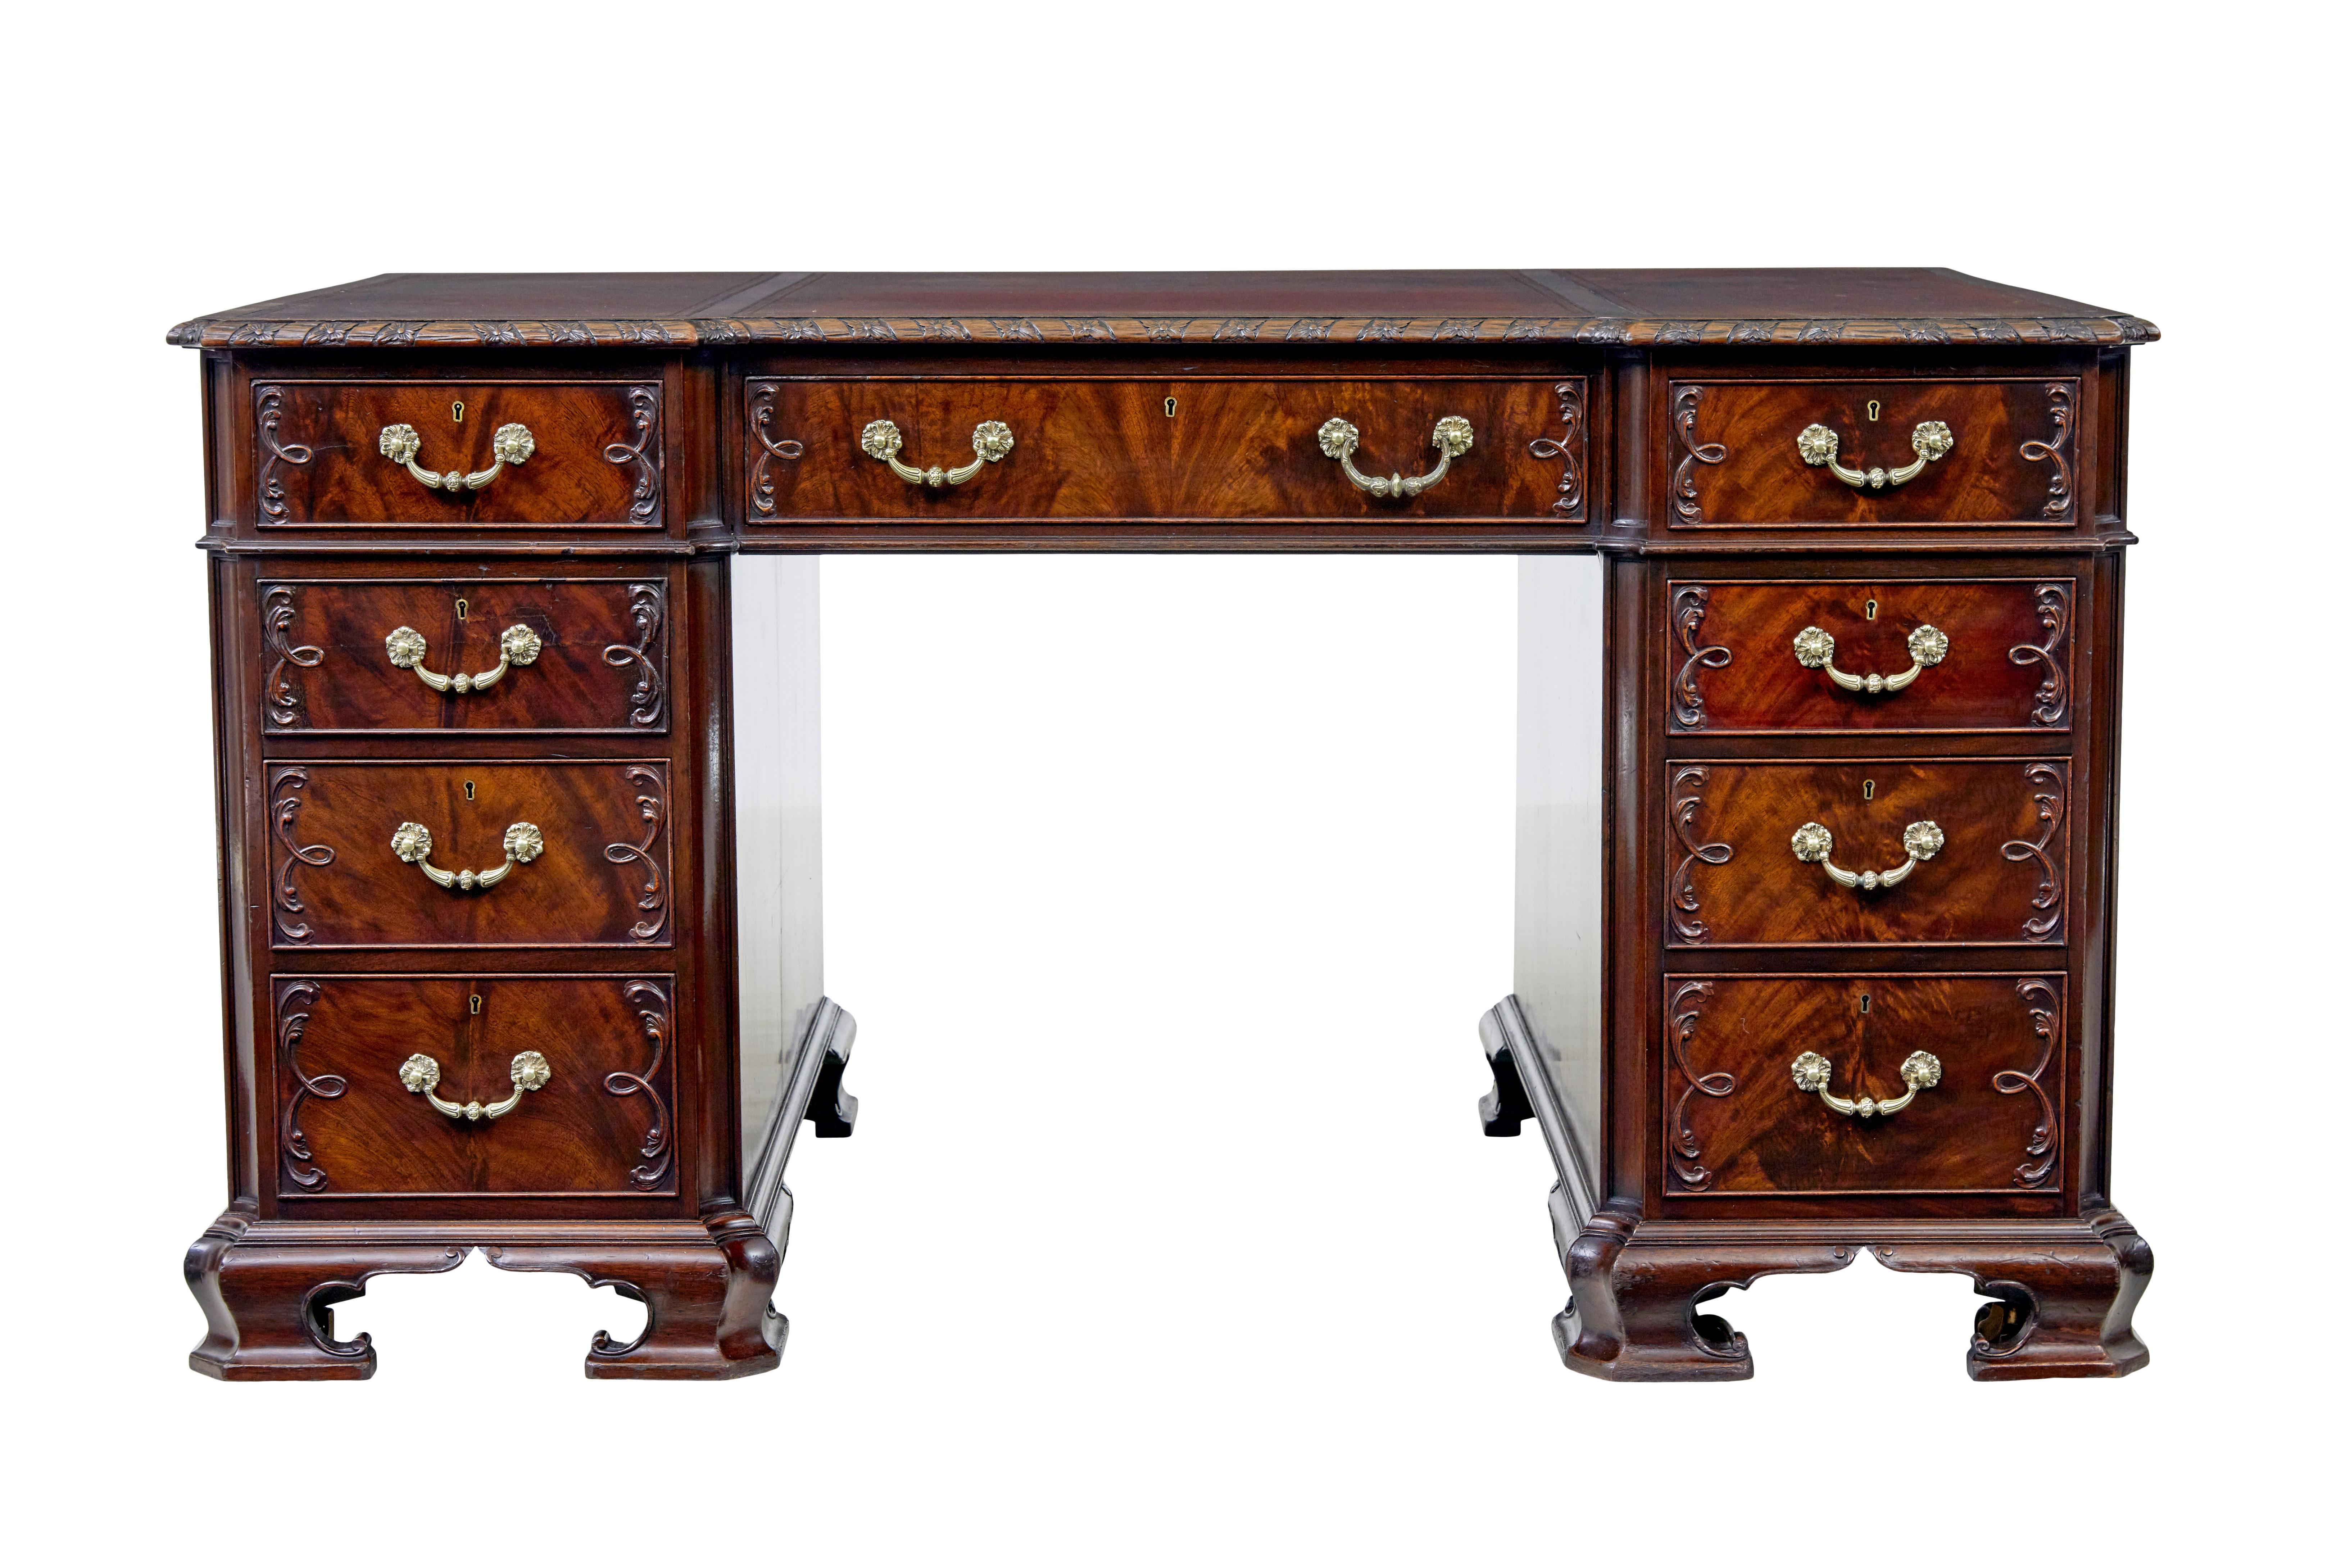 Early 20th century mahogany pedestal desk by hobbs & co circa 1900.

Beautiful desk in the adams style circa 1900. Stamped by hobbs & co of london. Mahogany lined drawers. Shaped front, applied carvings to drawers and doors. Hidden castors behind